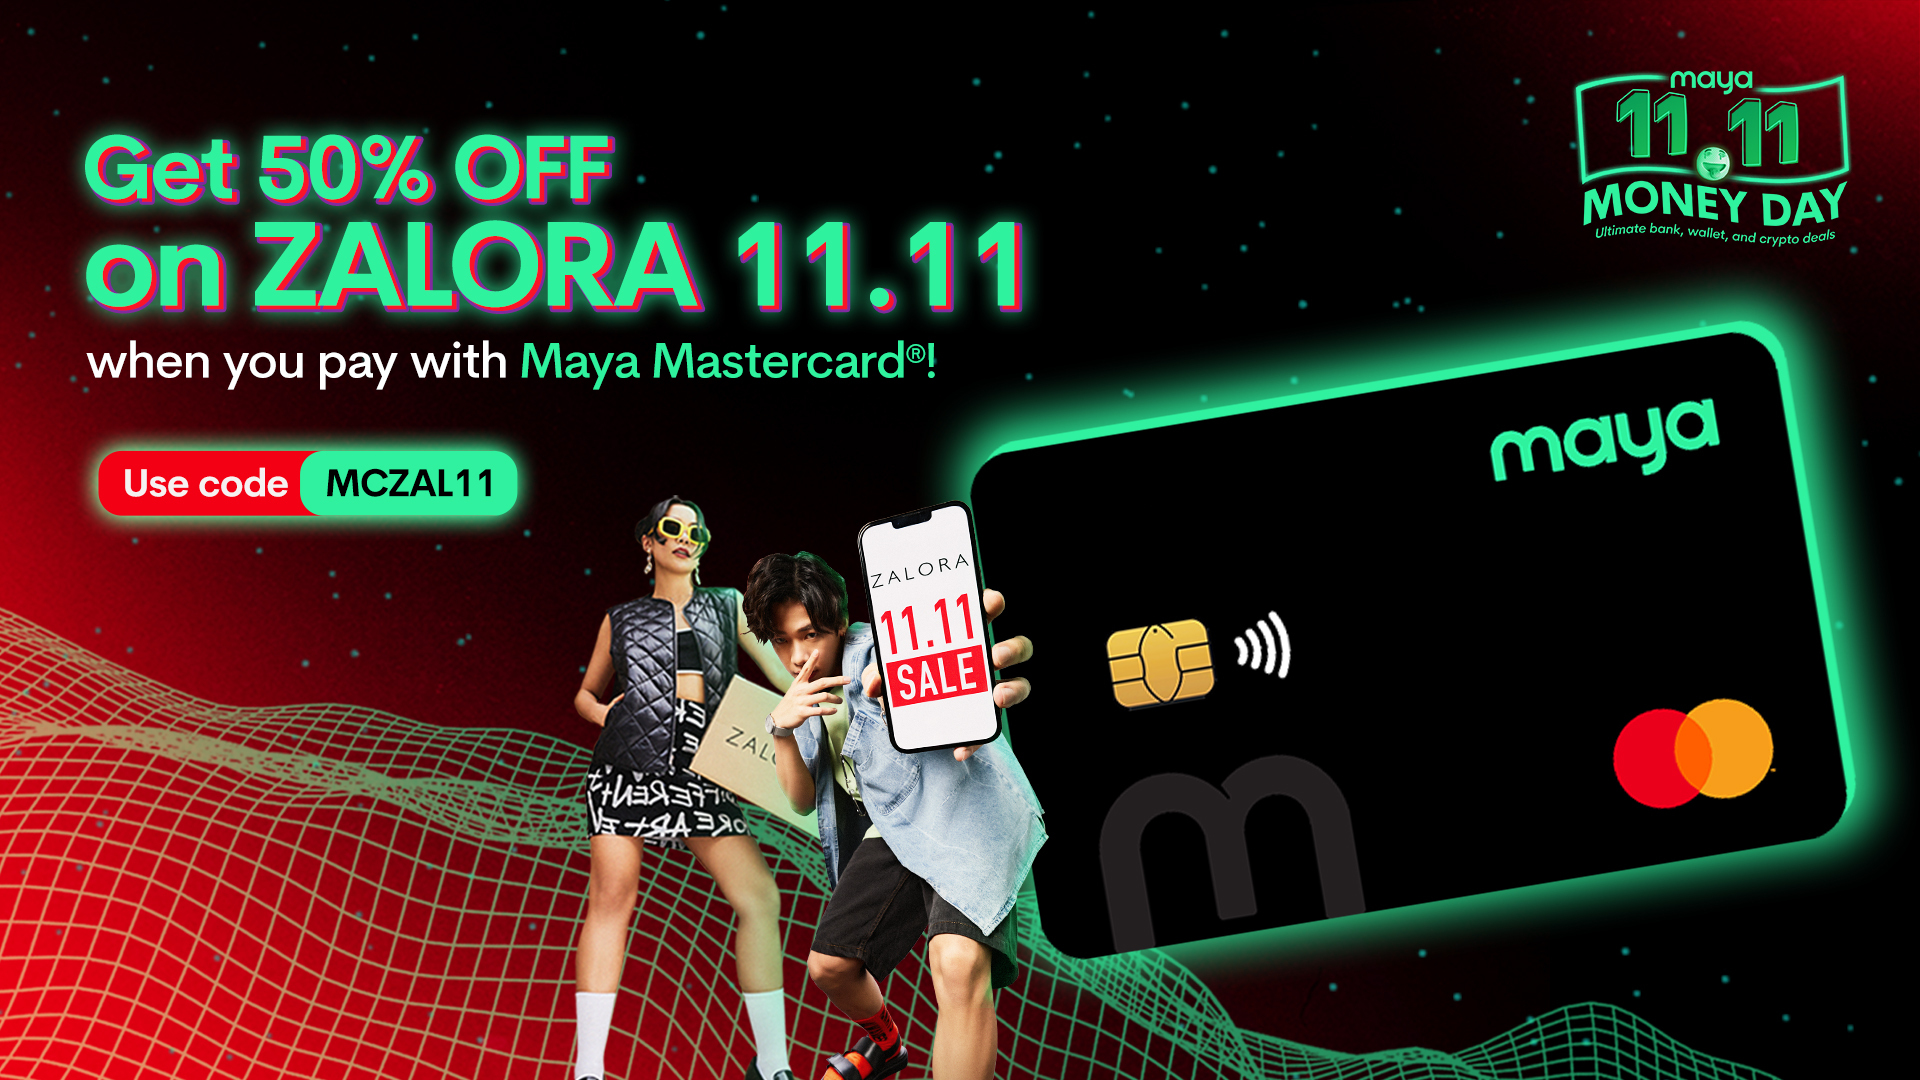 Get 50% OFF on Zalora with your Maya Mastercard®